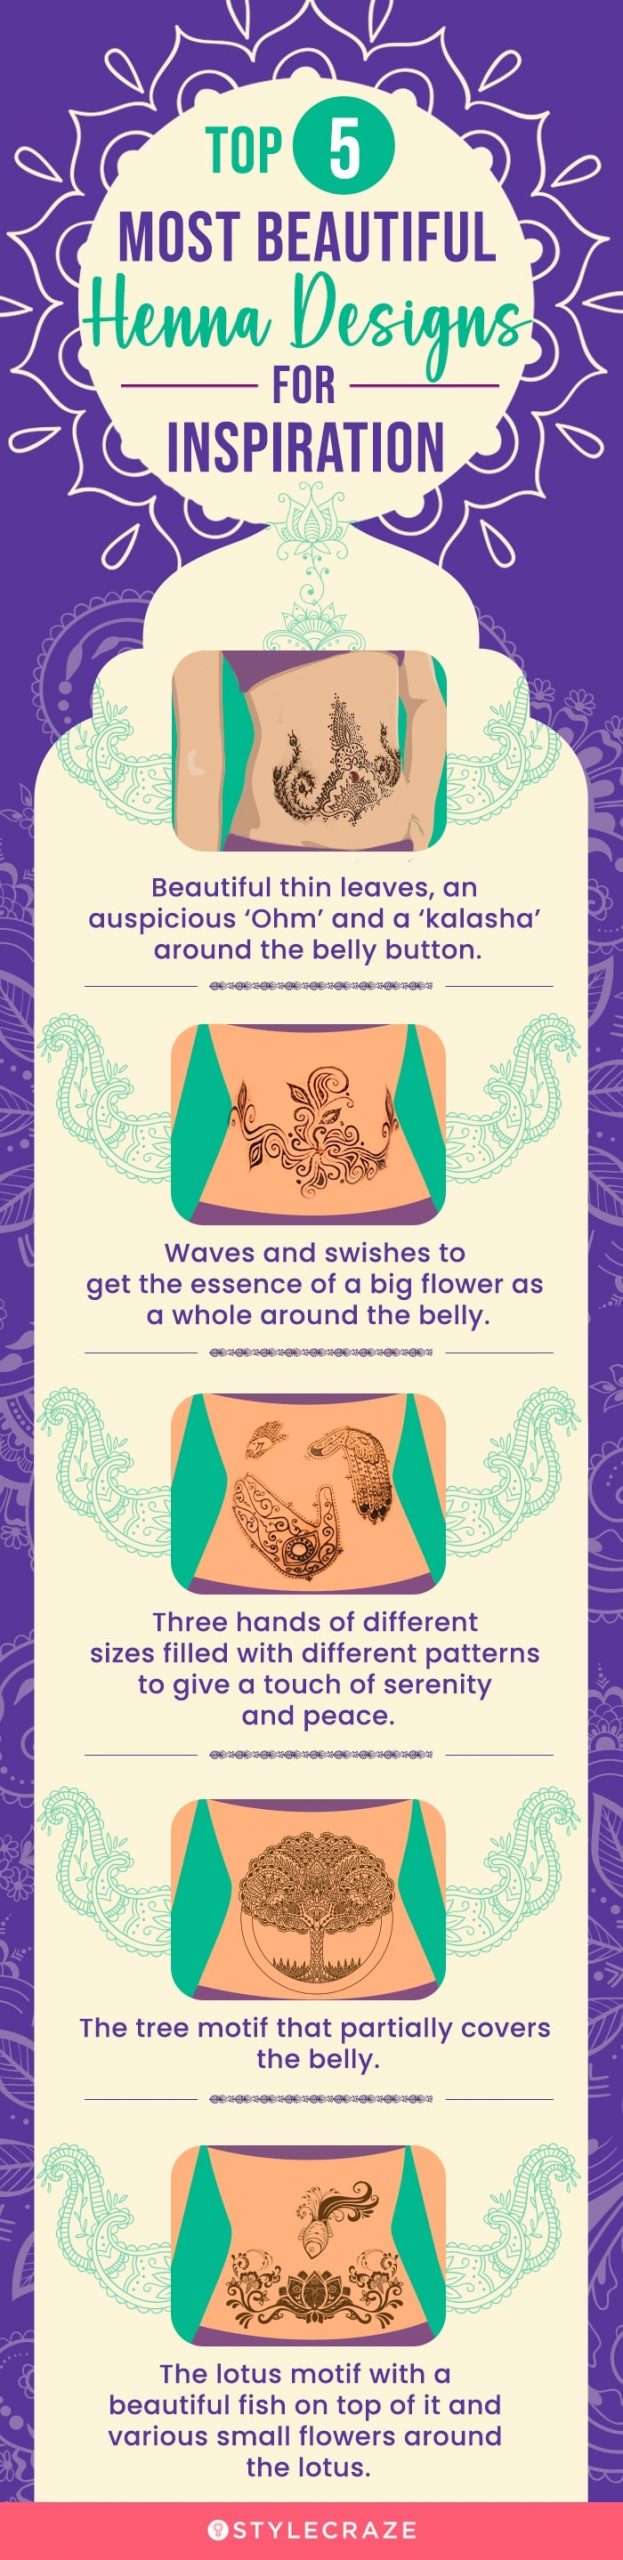 top 5 most beautiful henna designs for inspiration (infographic)